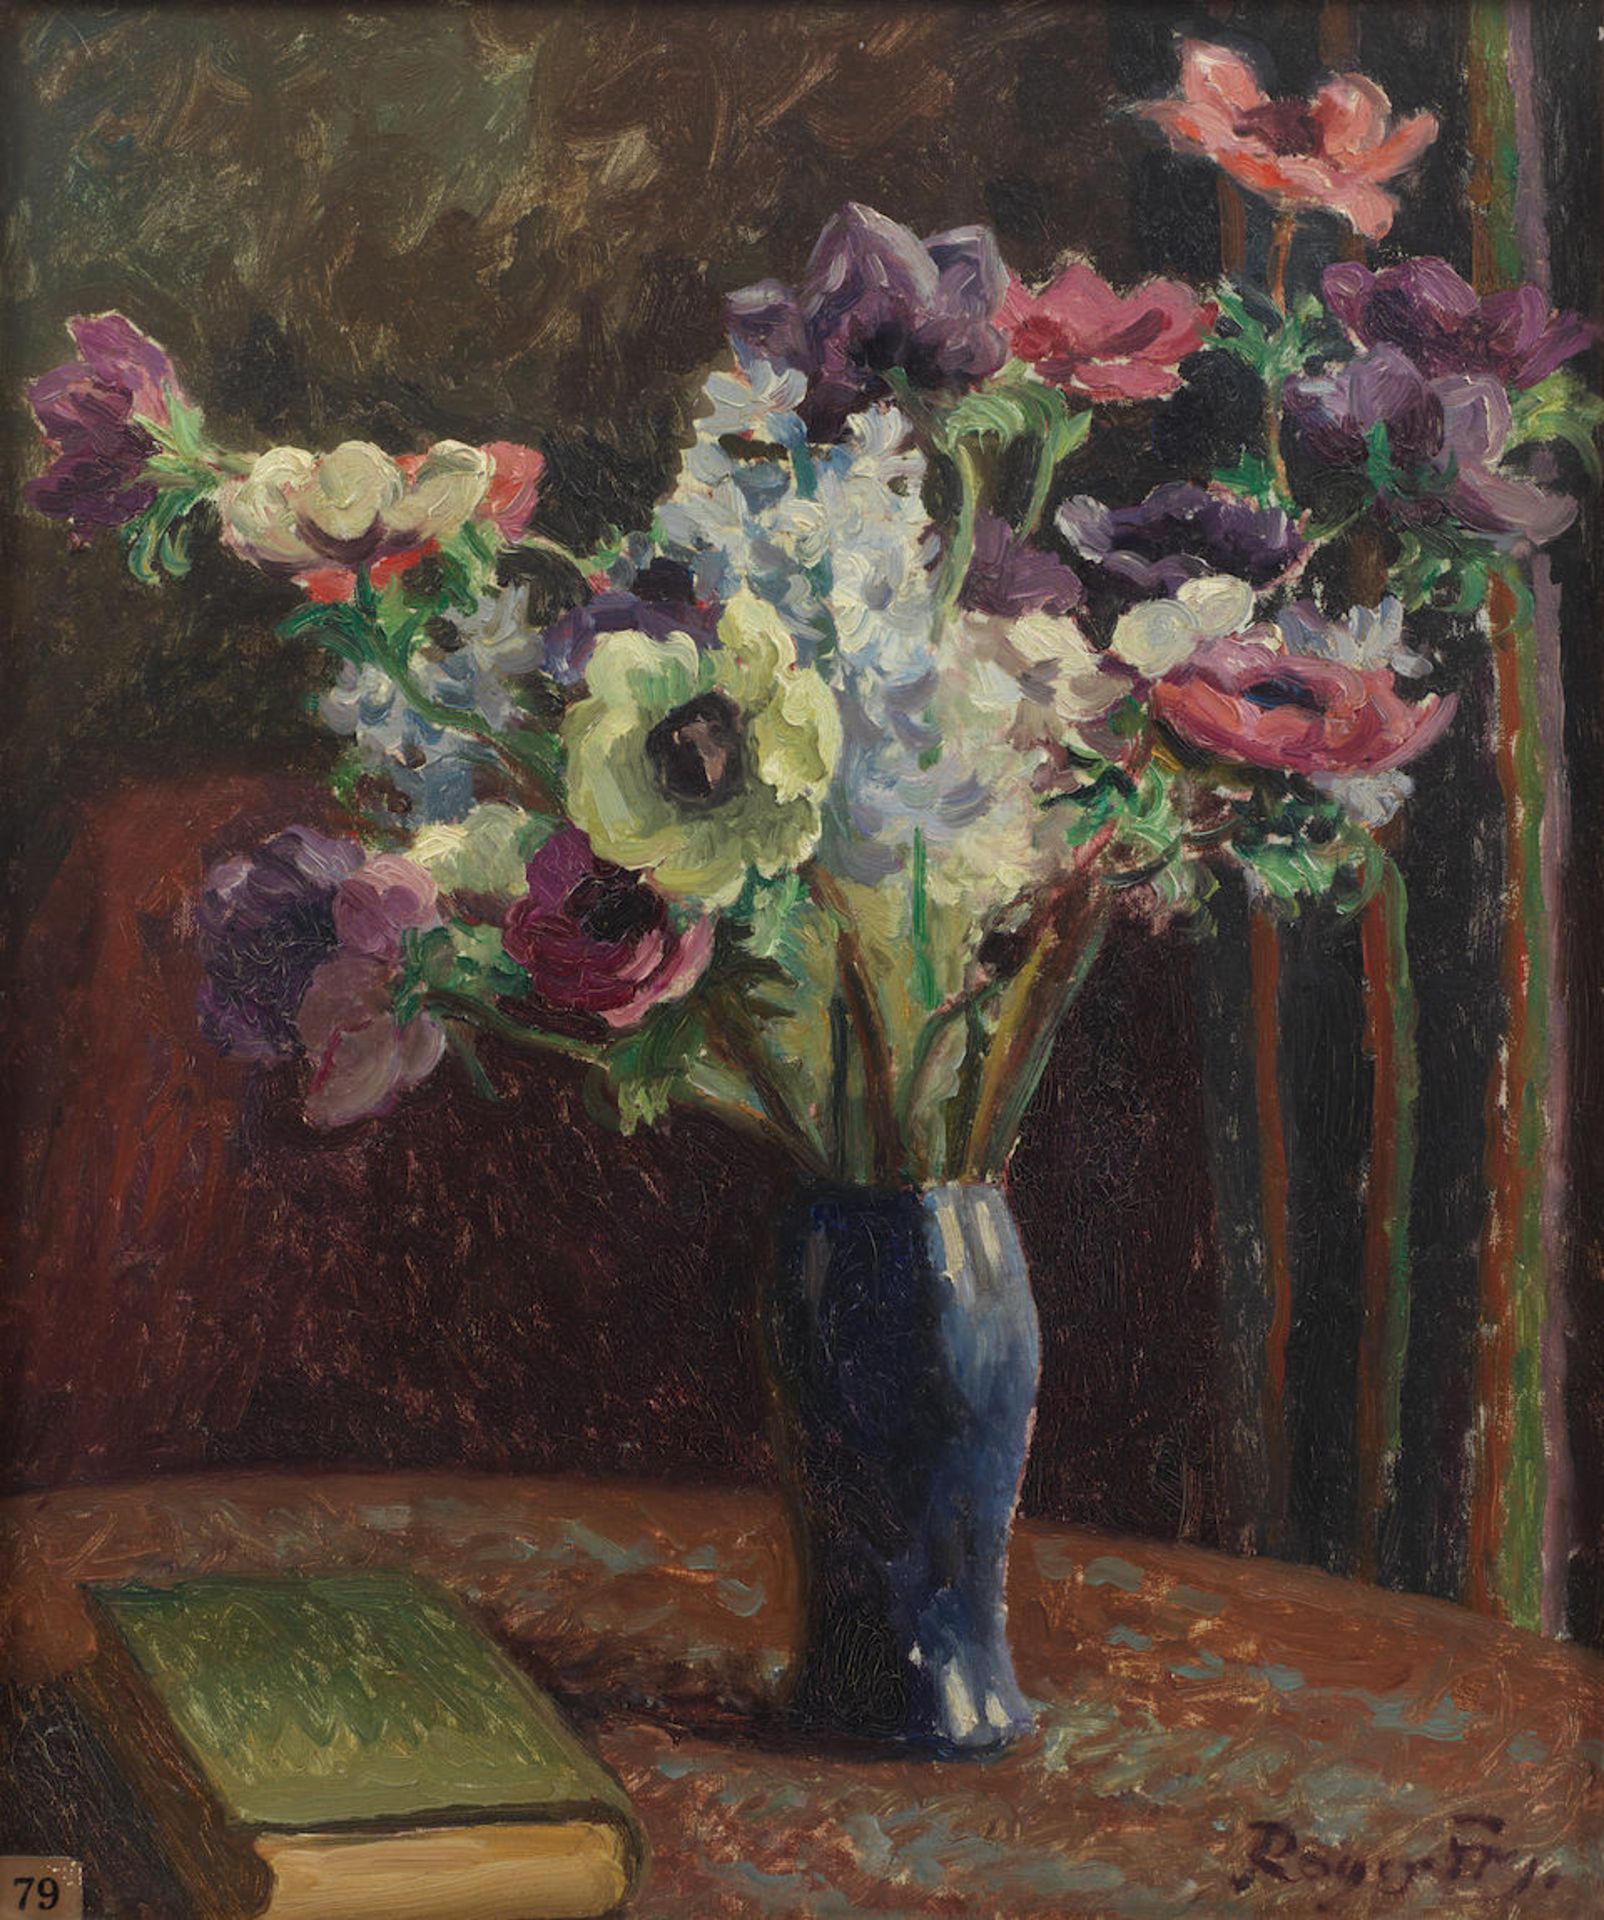 Roger Fry (British, 1866-1934) Hyacinths and Anemones 54.6 x 45.7 cm. (21 1/2 x 18 in.) (Painte...